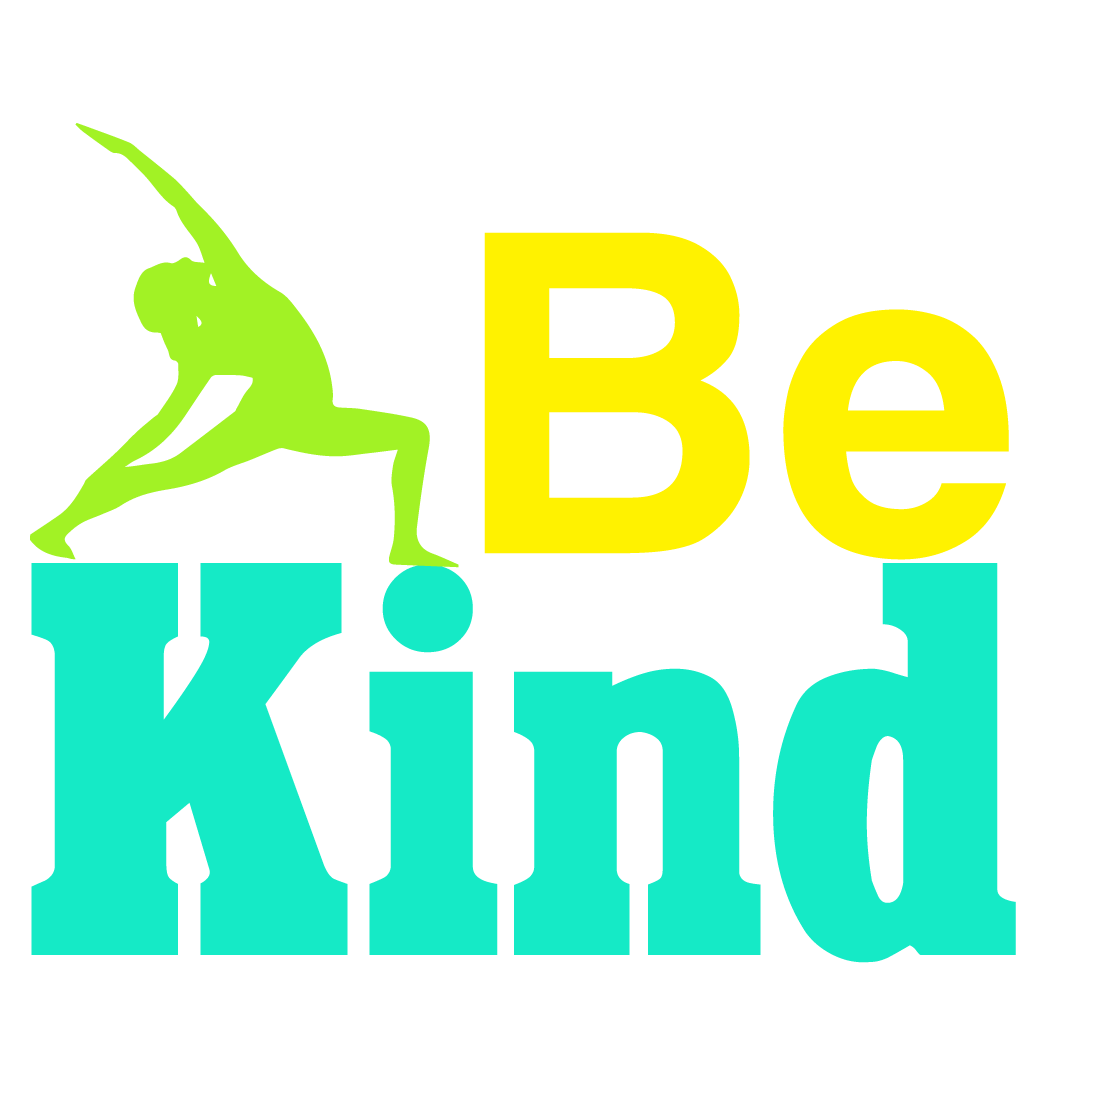 Be kind preview image.